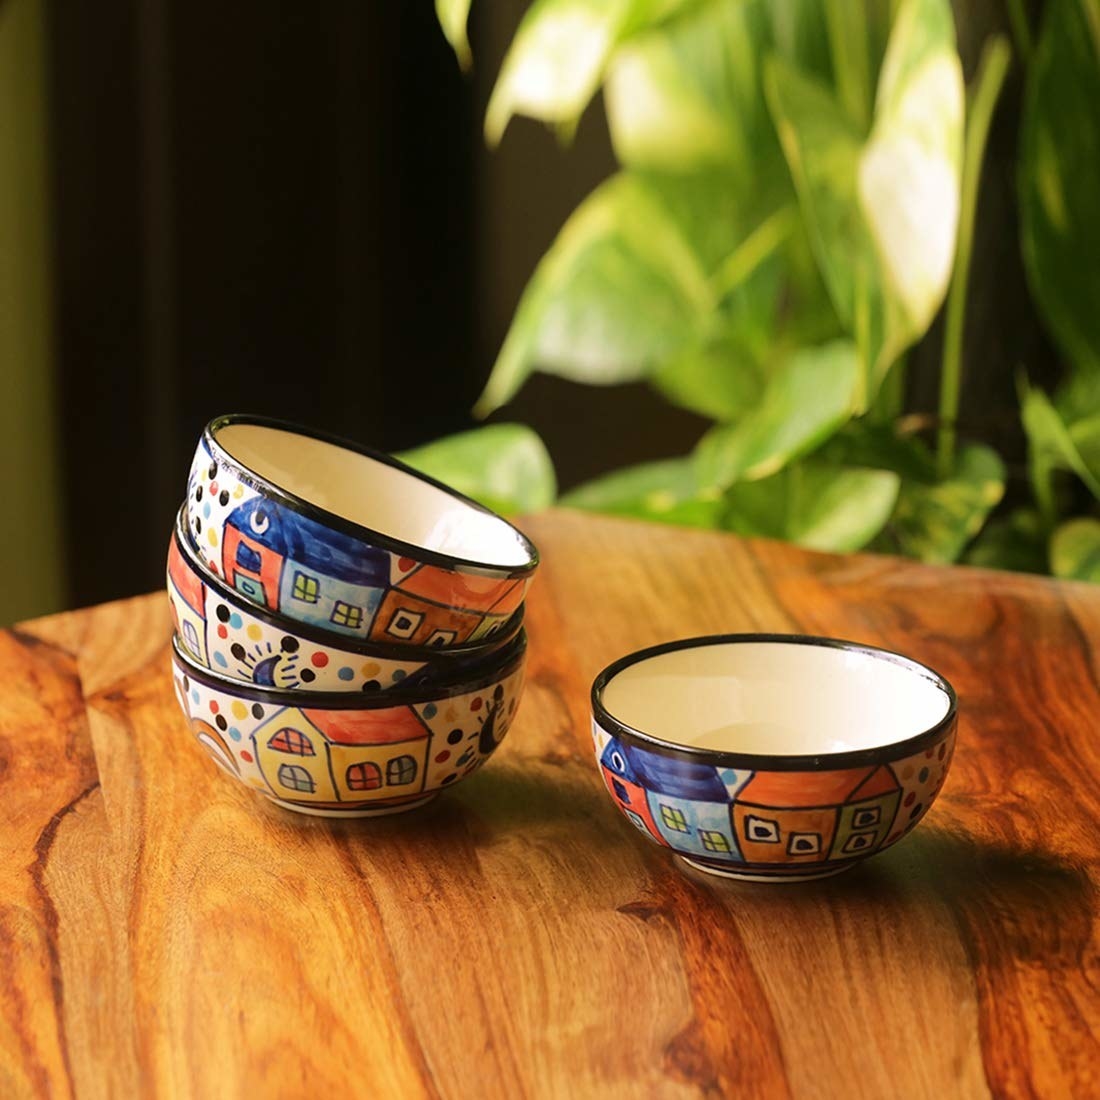 A set of bowls on a table